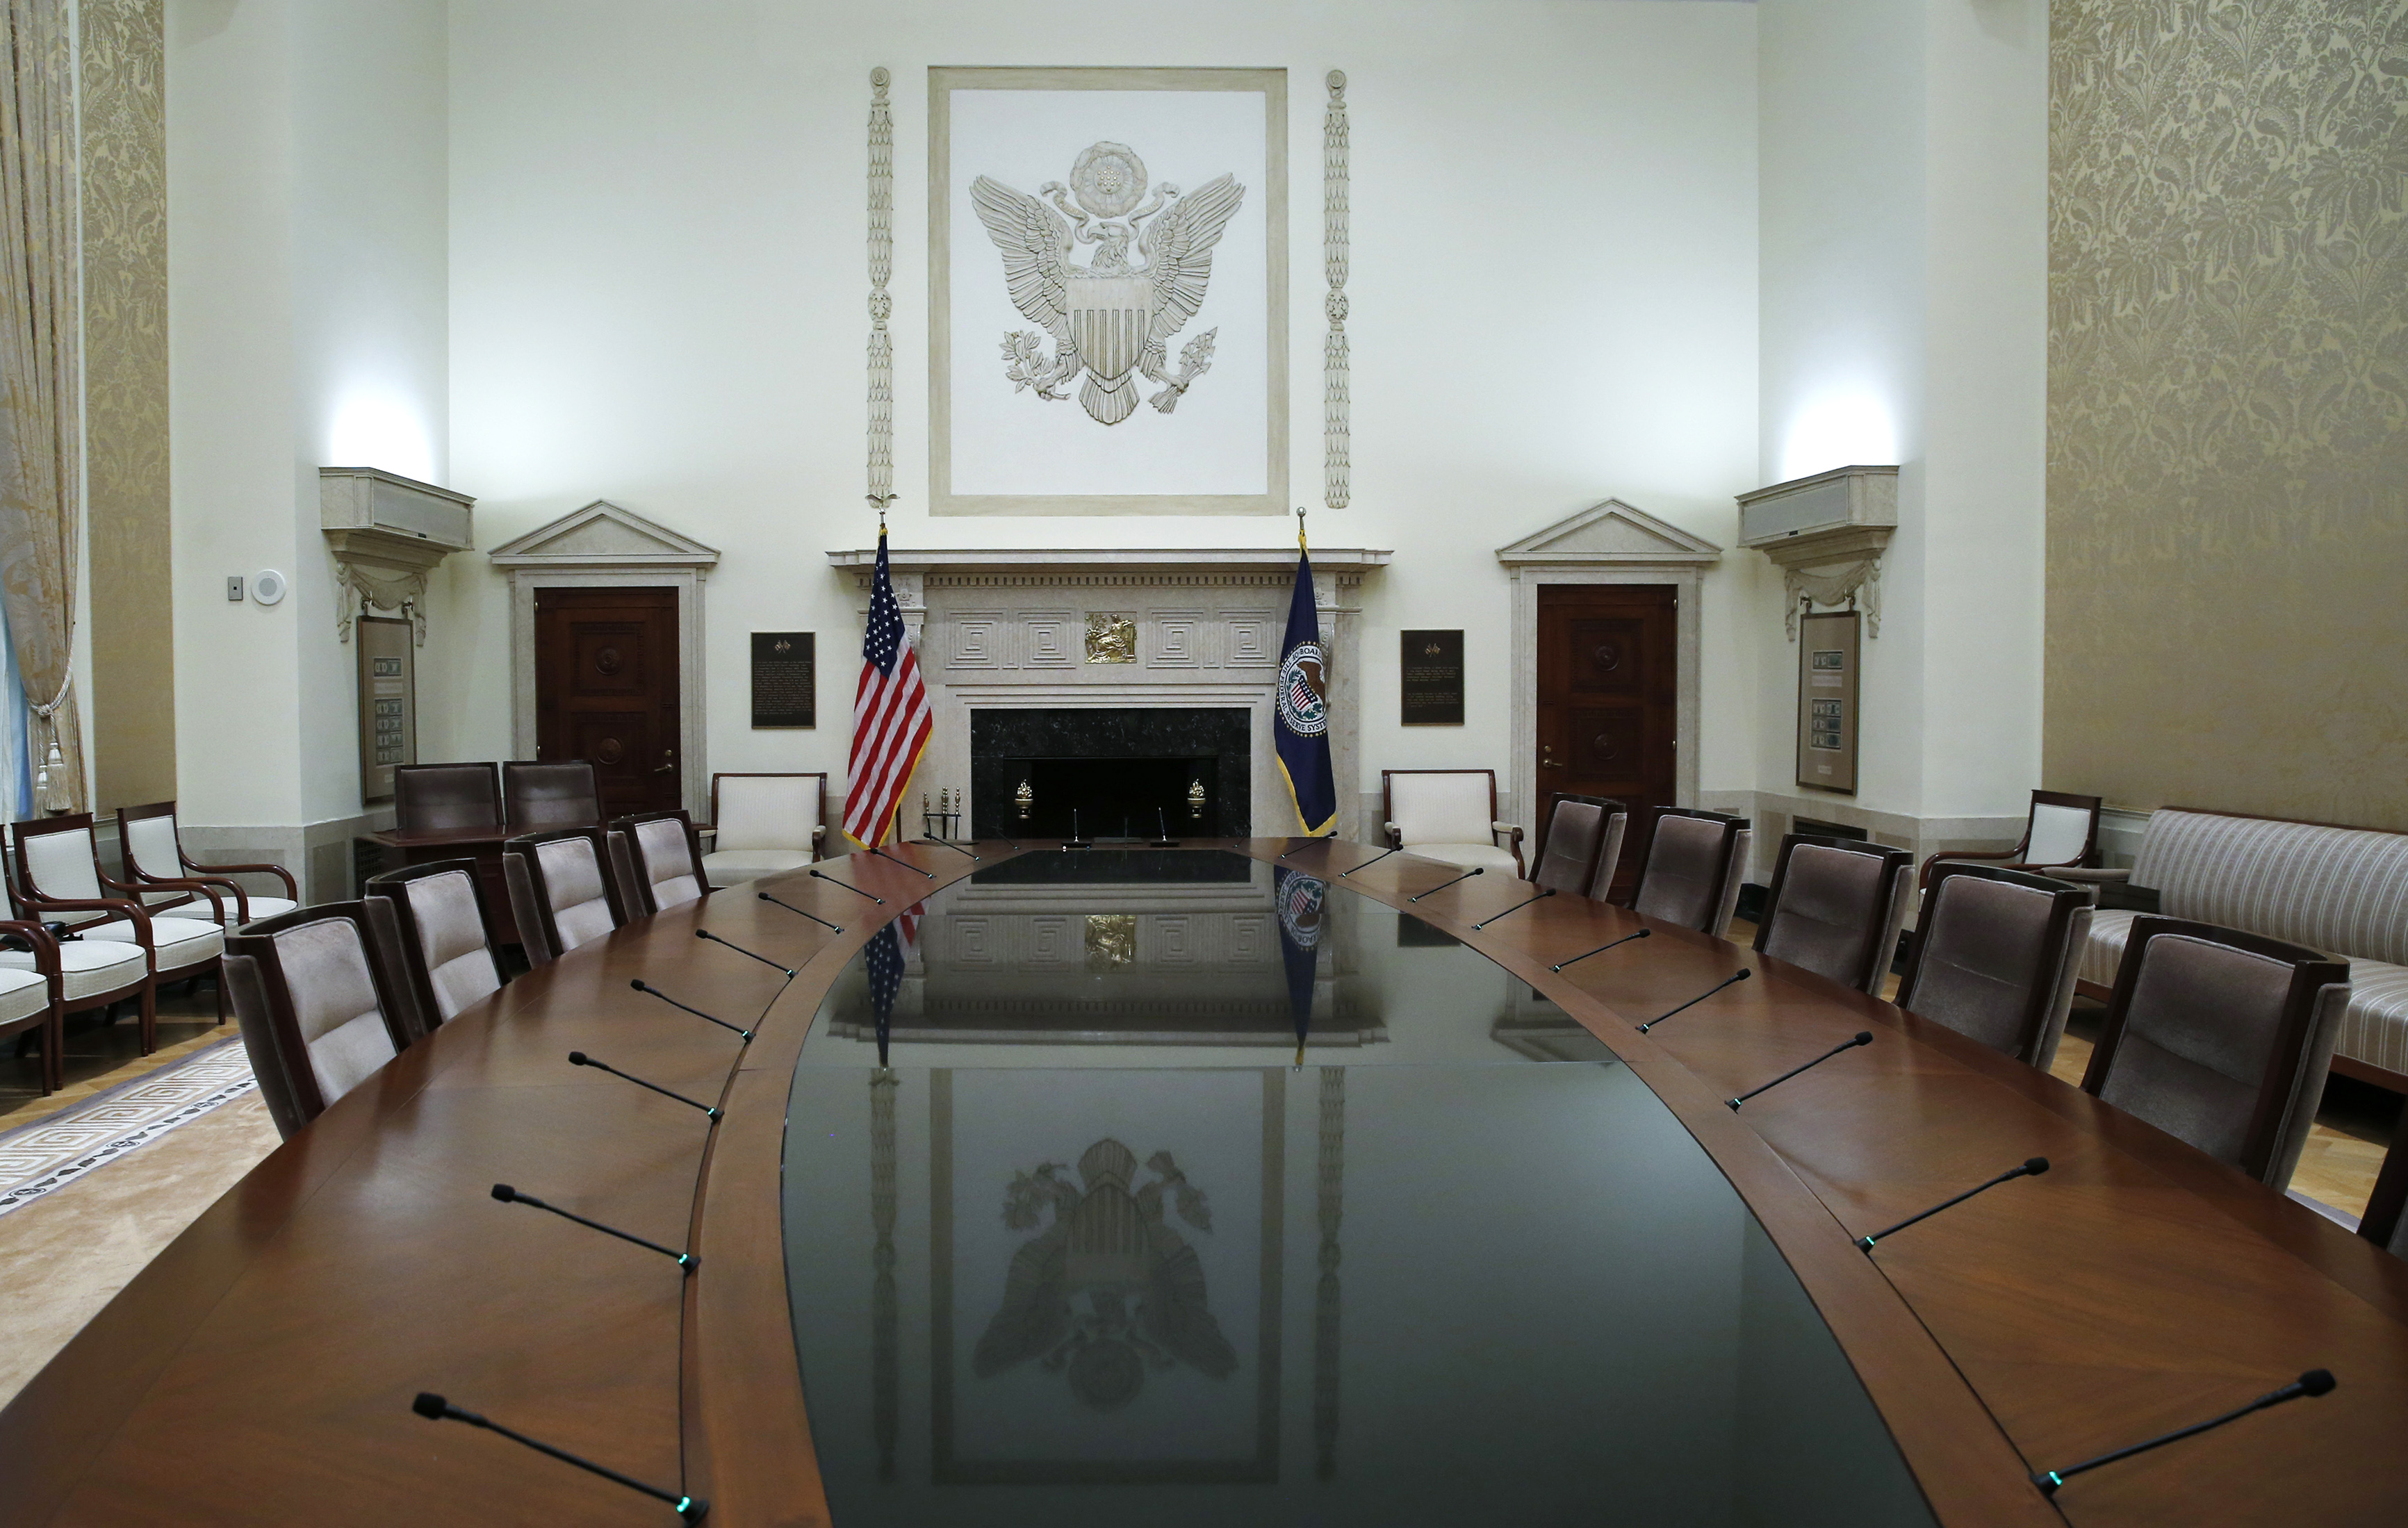 The conference table of the Federal Reserve Board of Governor is seen empty at Federal Reserve Board headquarters before new Chairwoman Janet Yellen took the oath of office in the conference room at the Federal Reserve Board in Washington, February 3, 2014. REUTERS/Jim Bourg (UNITED STATES - Tags: BUSINESS POLITICS) - RTX186FQ